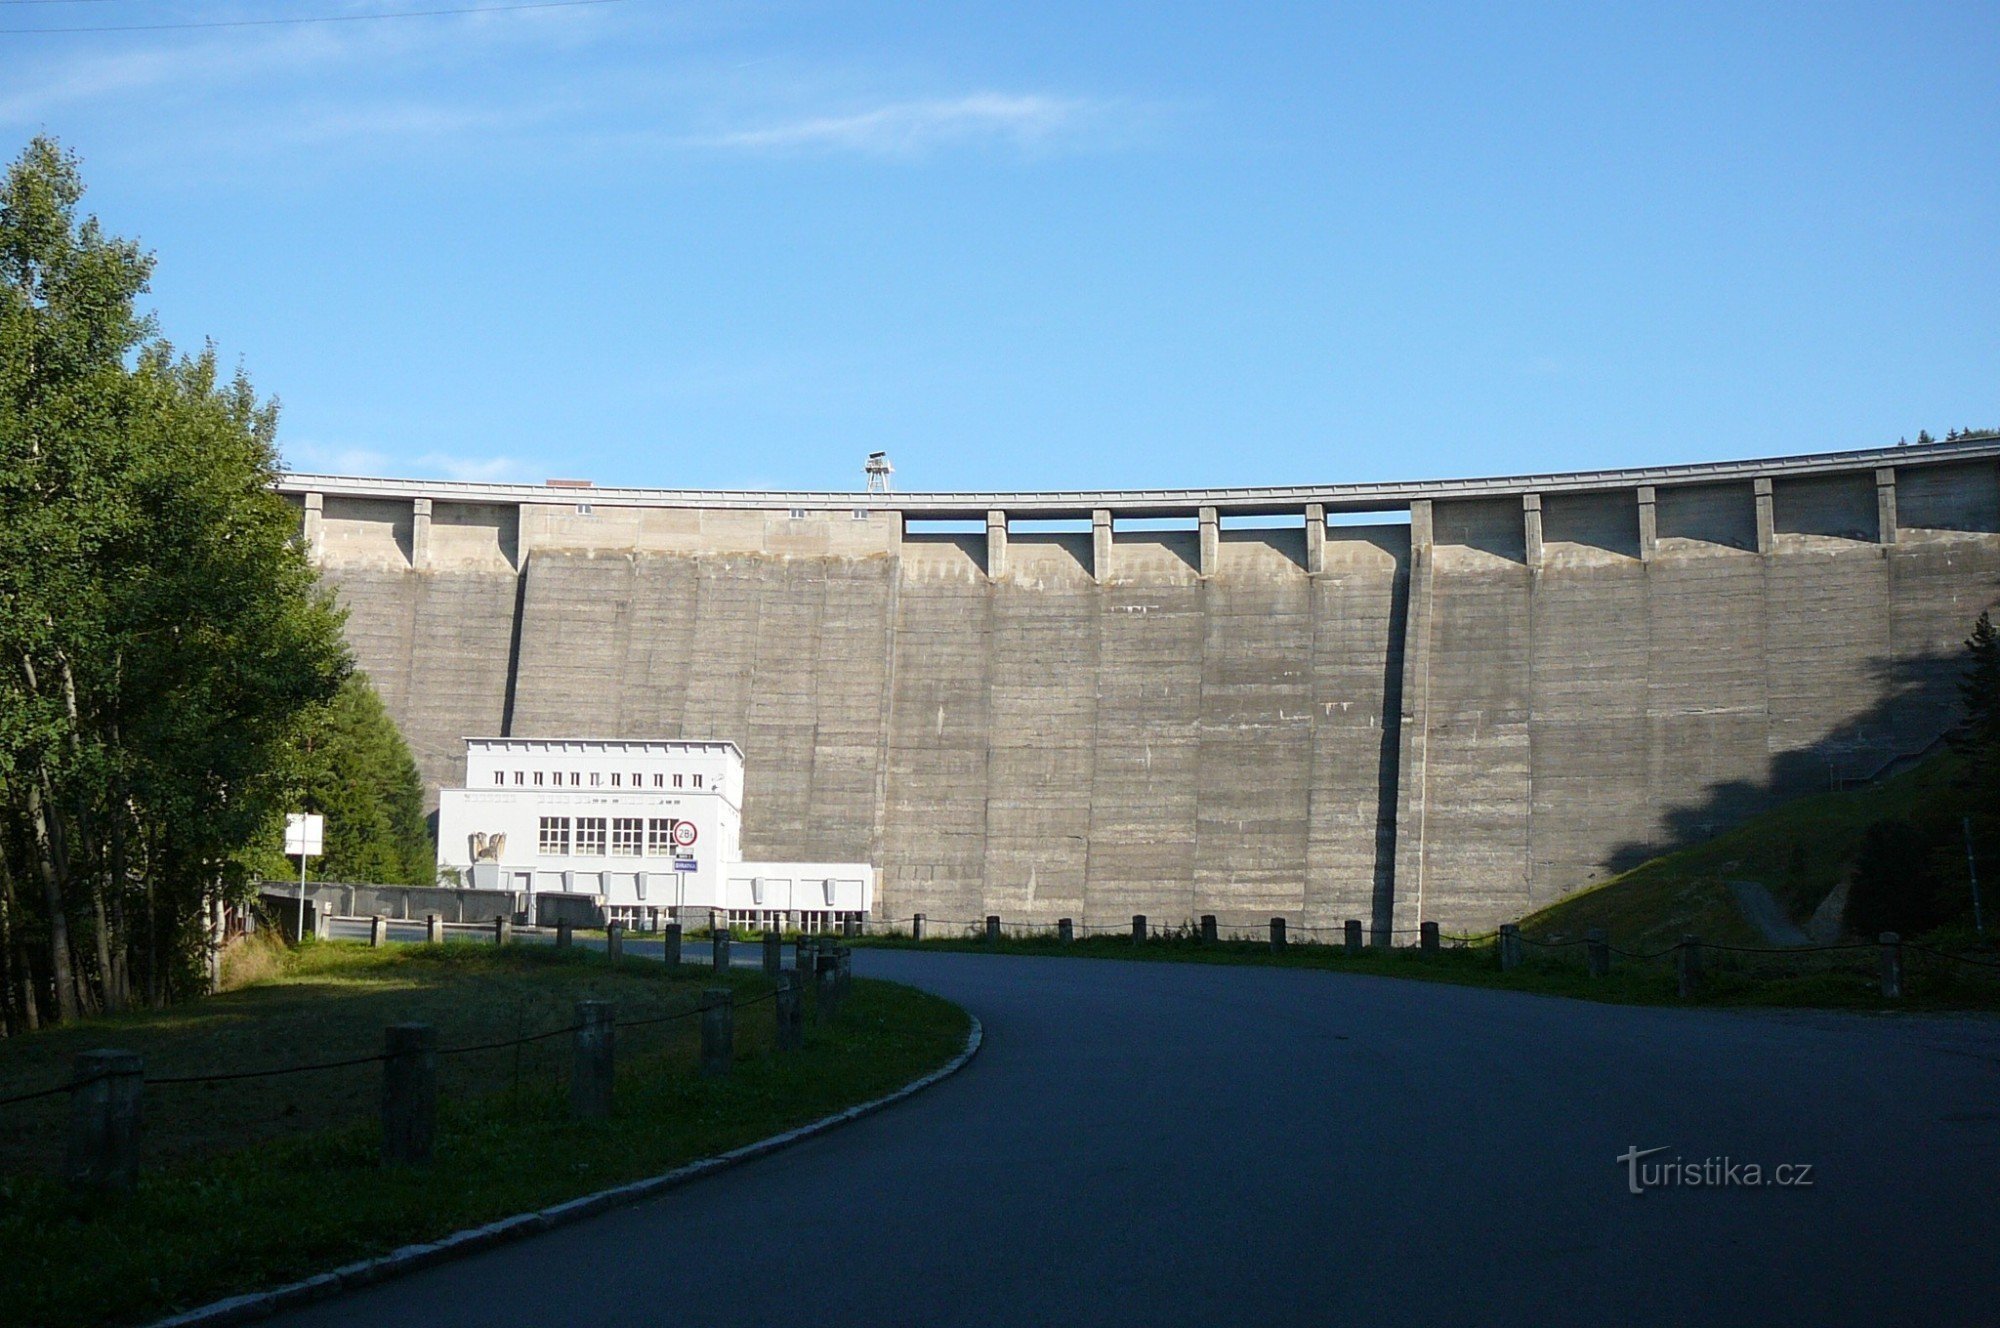 The 78 m high and 390 m long dam of the Vír I dam